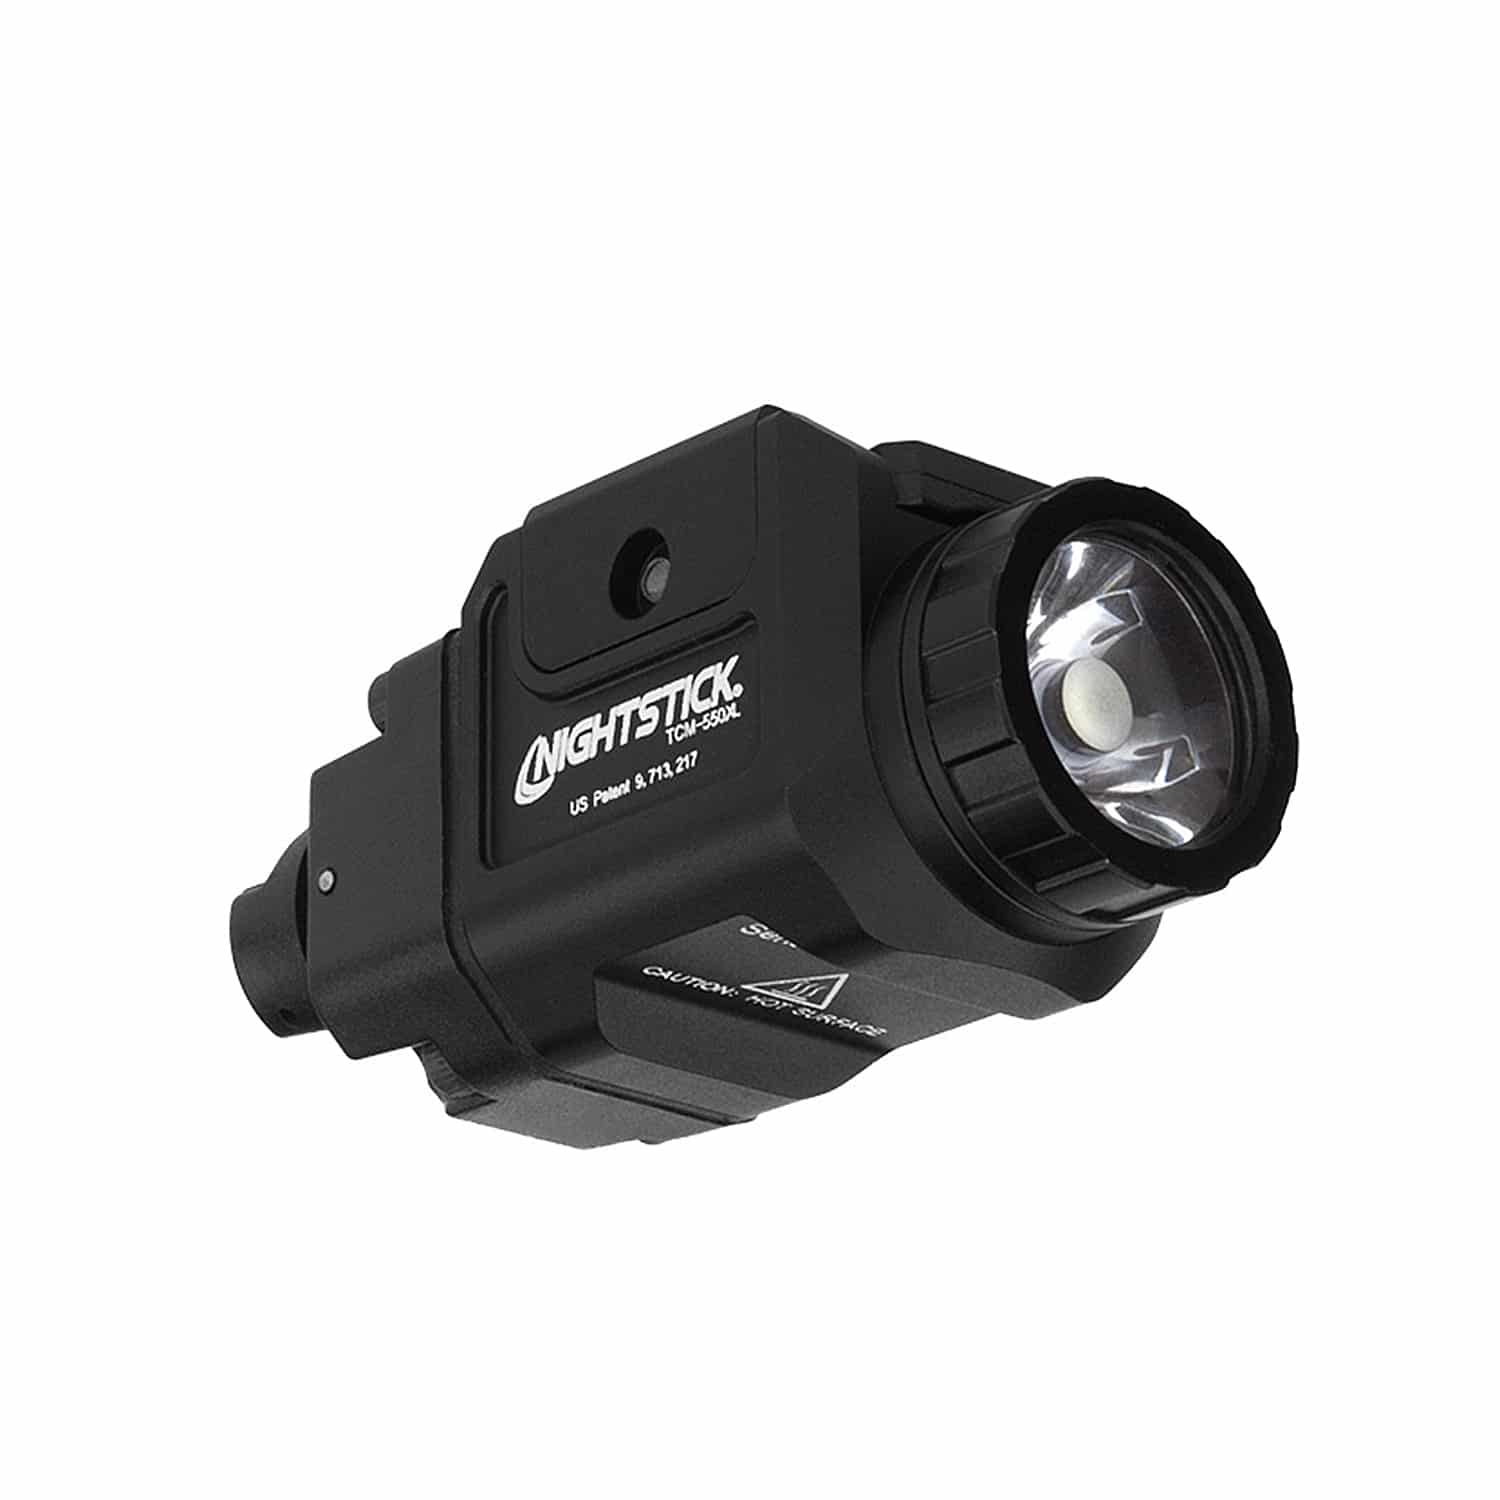 TCM-550XLS Compact Weapon-Mounted Light with Strobe -